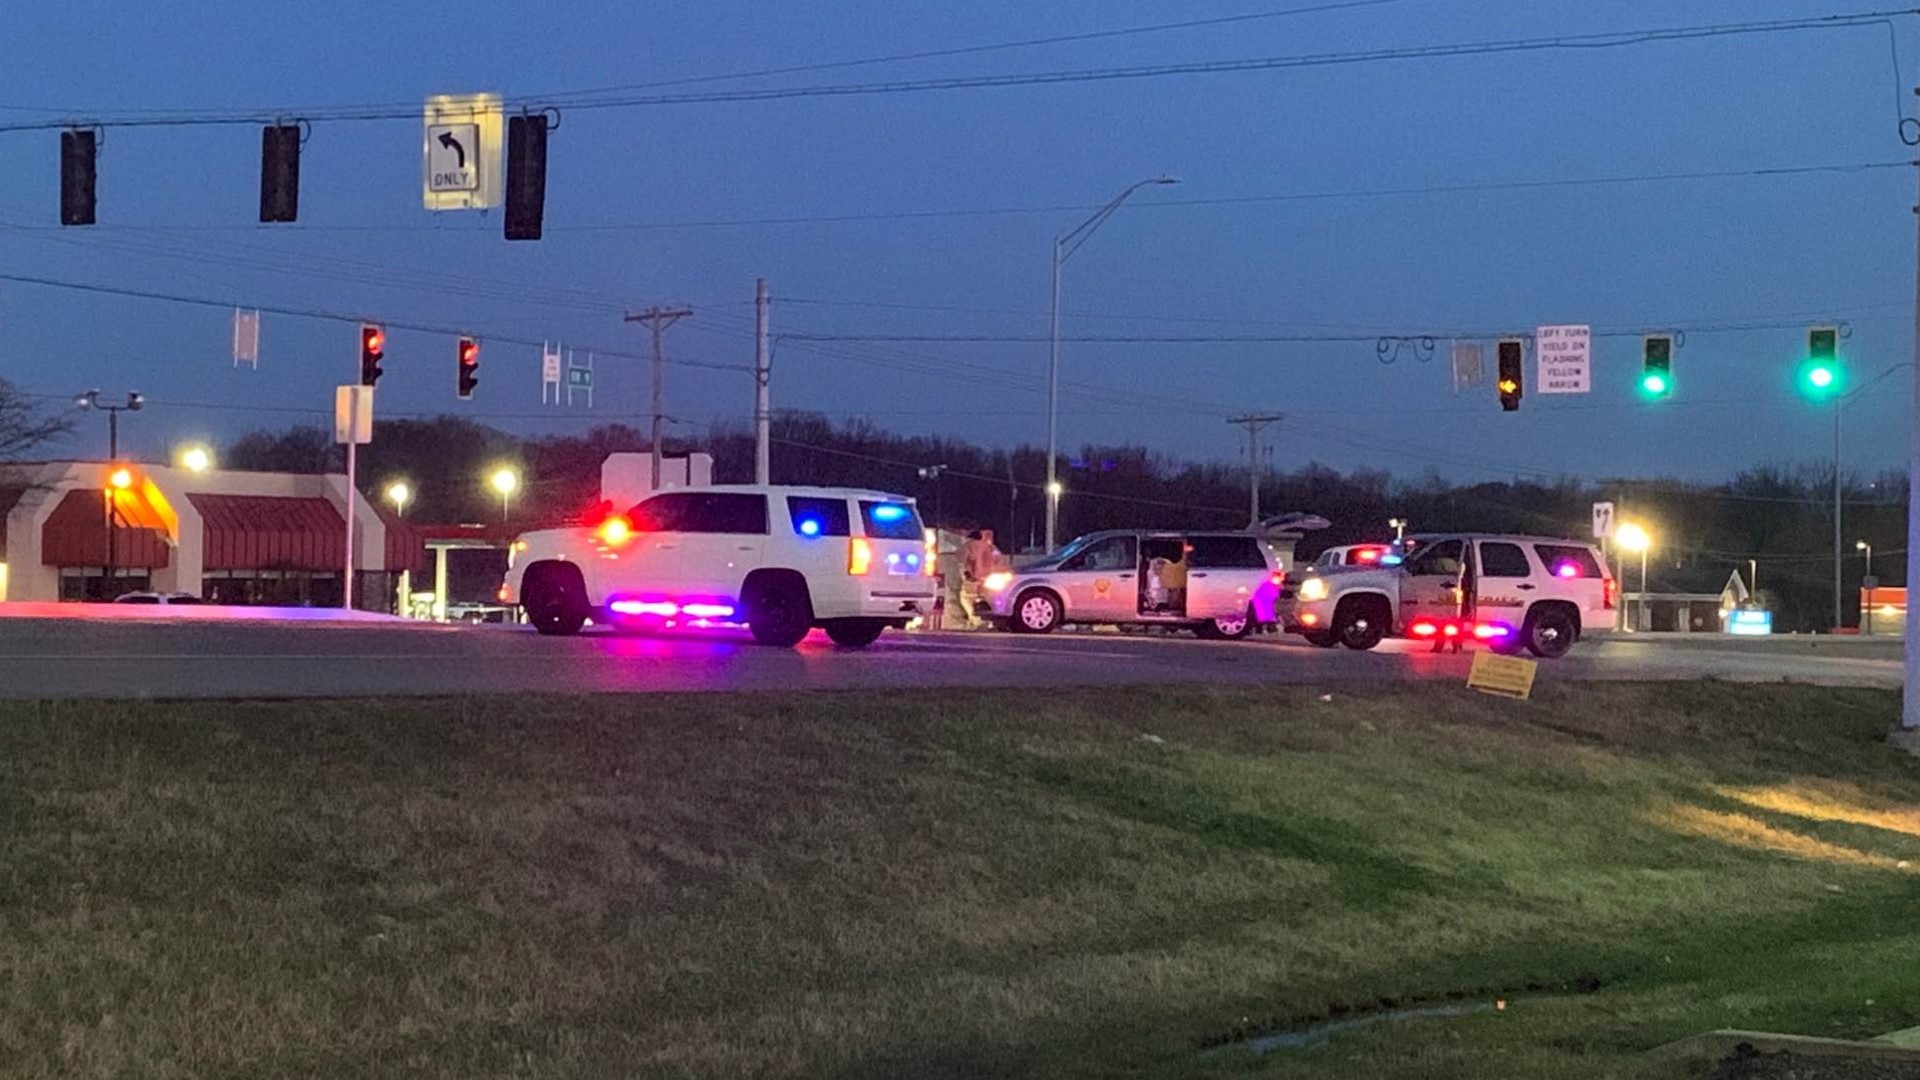 The motorcyclist was being chased by police when he t-boned another vehicle at an intersection, according to the Henry County Sheriff's Office.